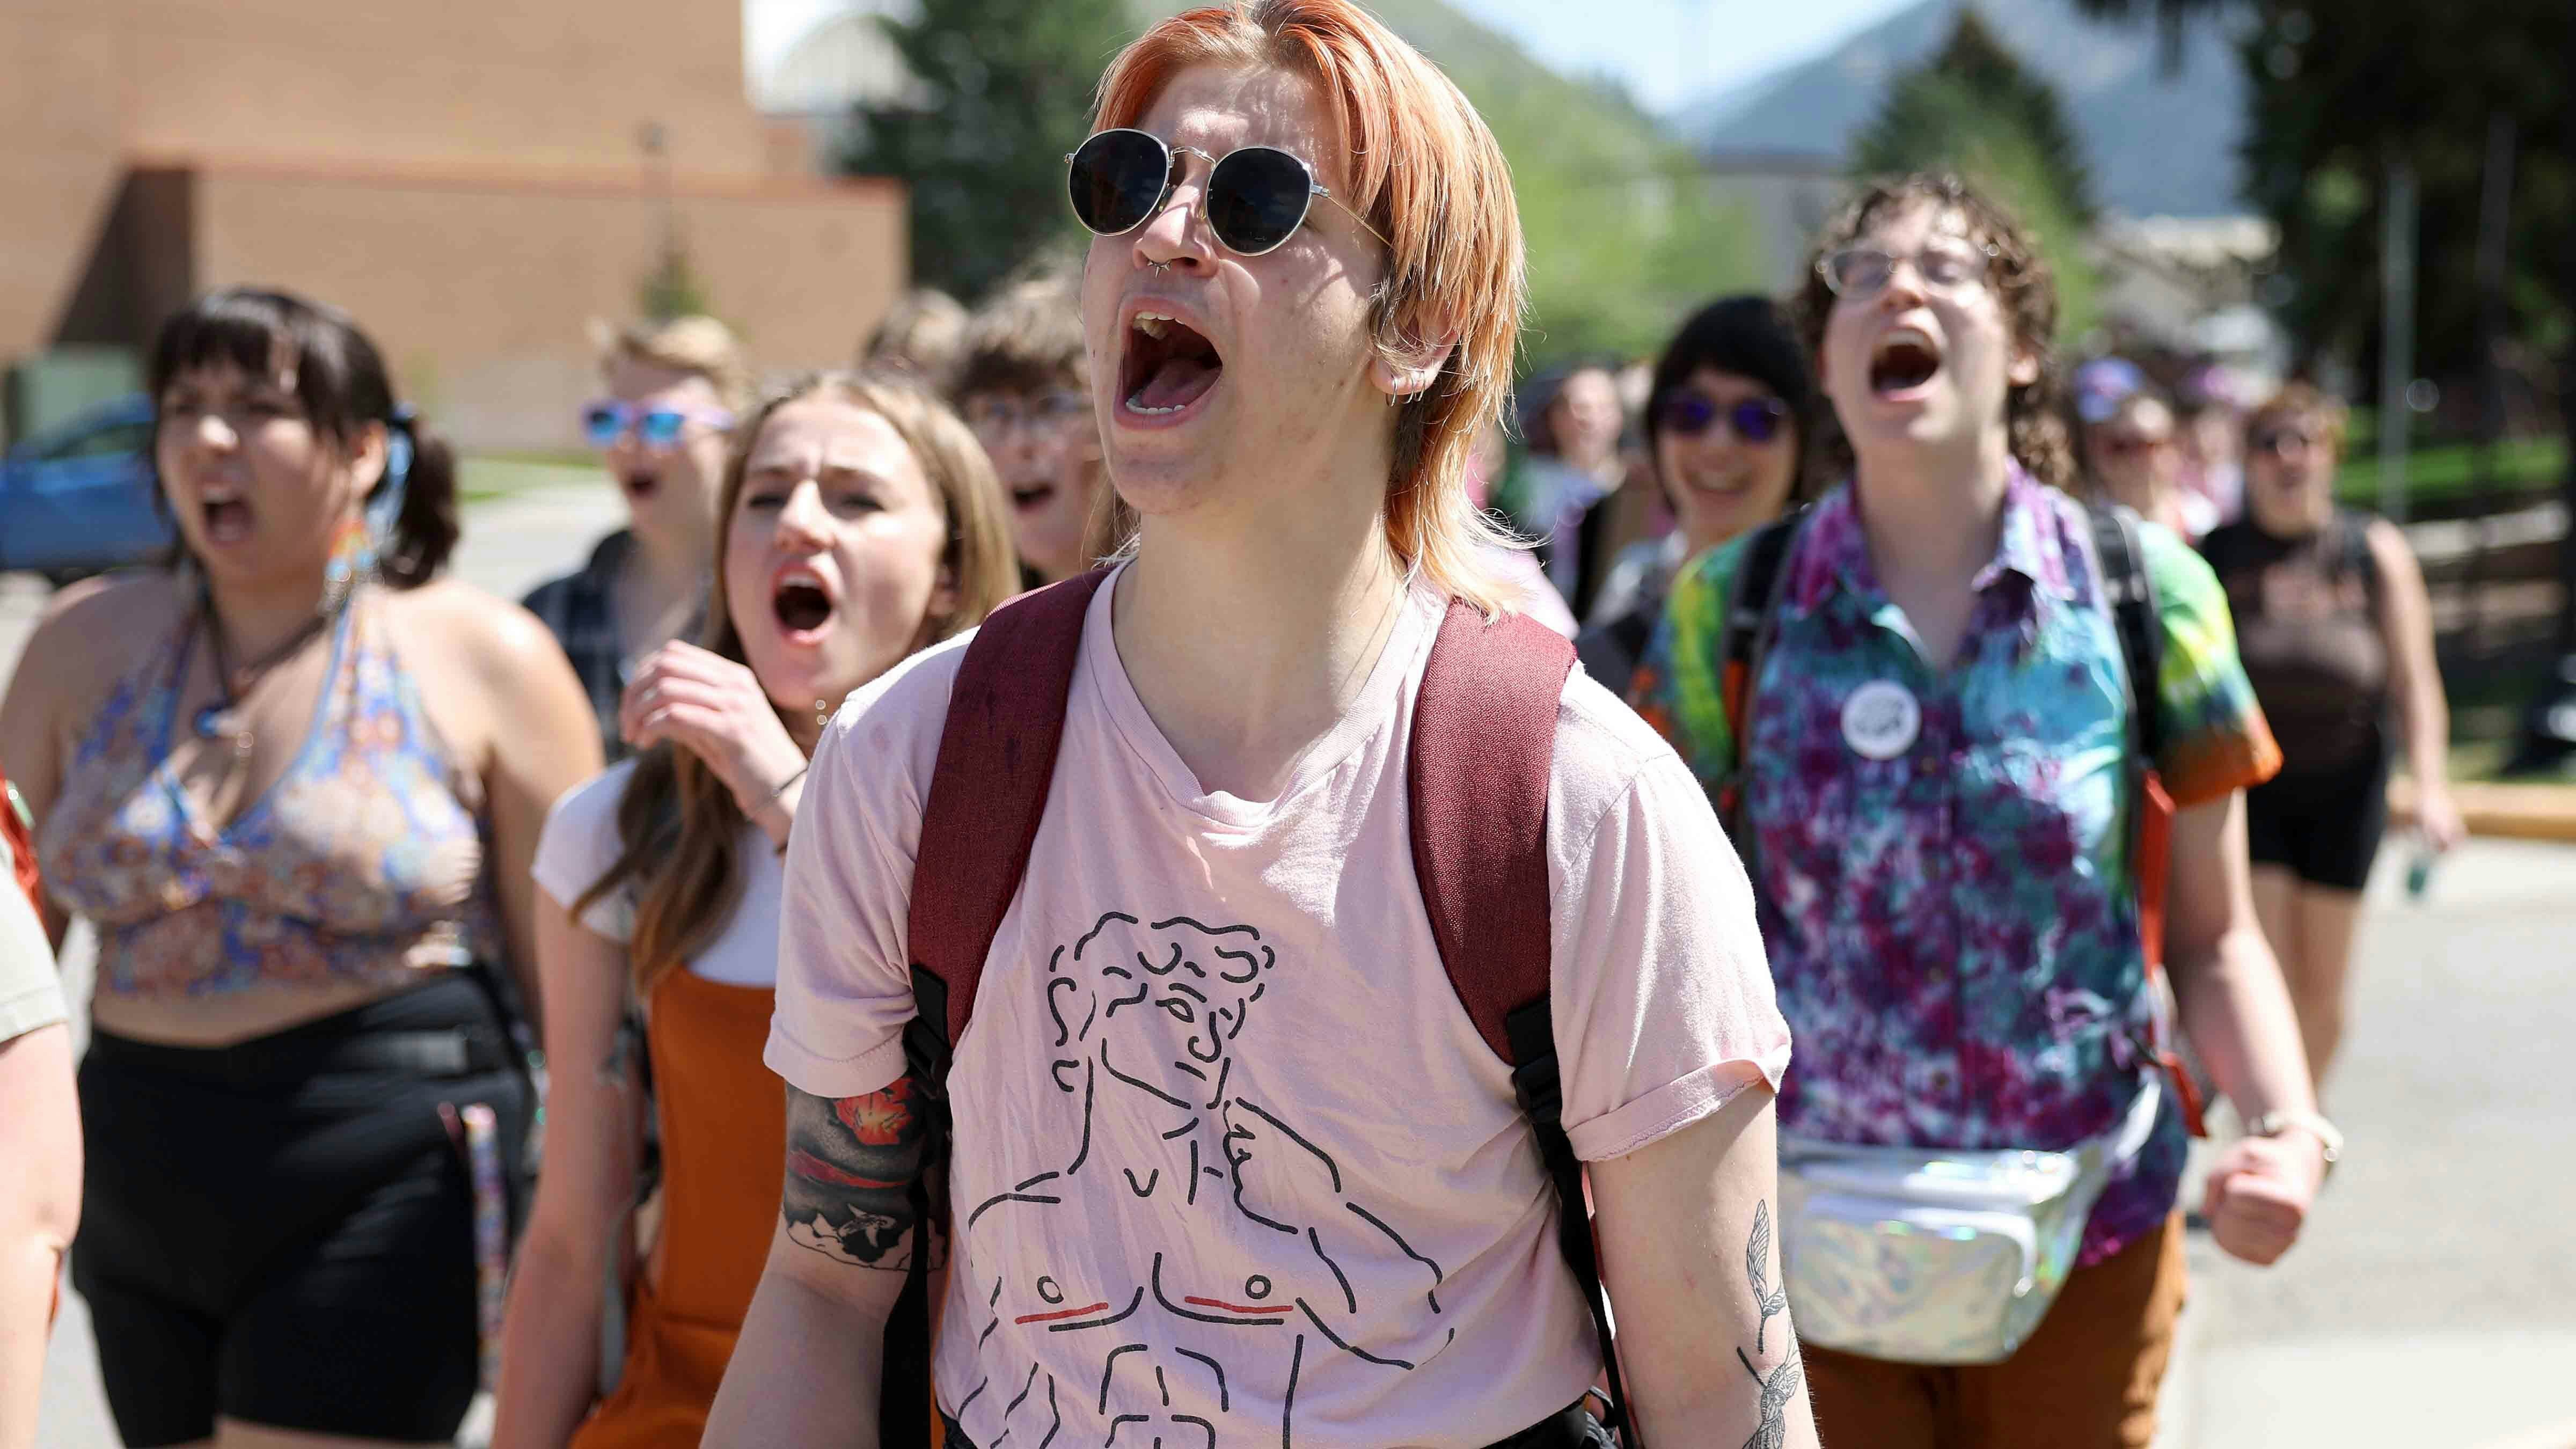 Transgender rights activists march through the University of Montana campus on May 03, 2023 in Missoula, Montana.